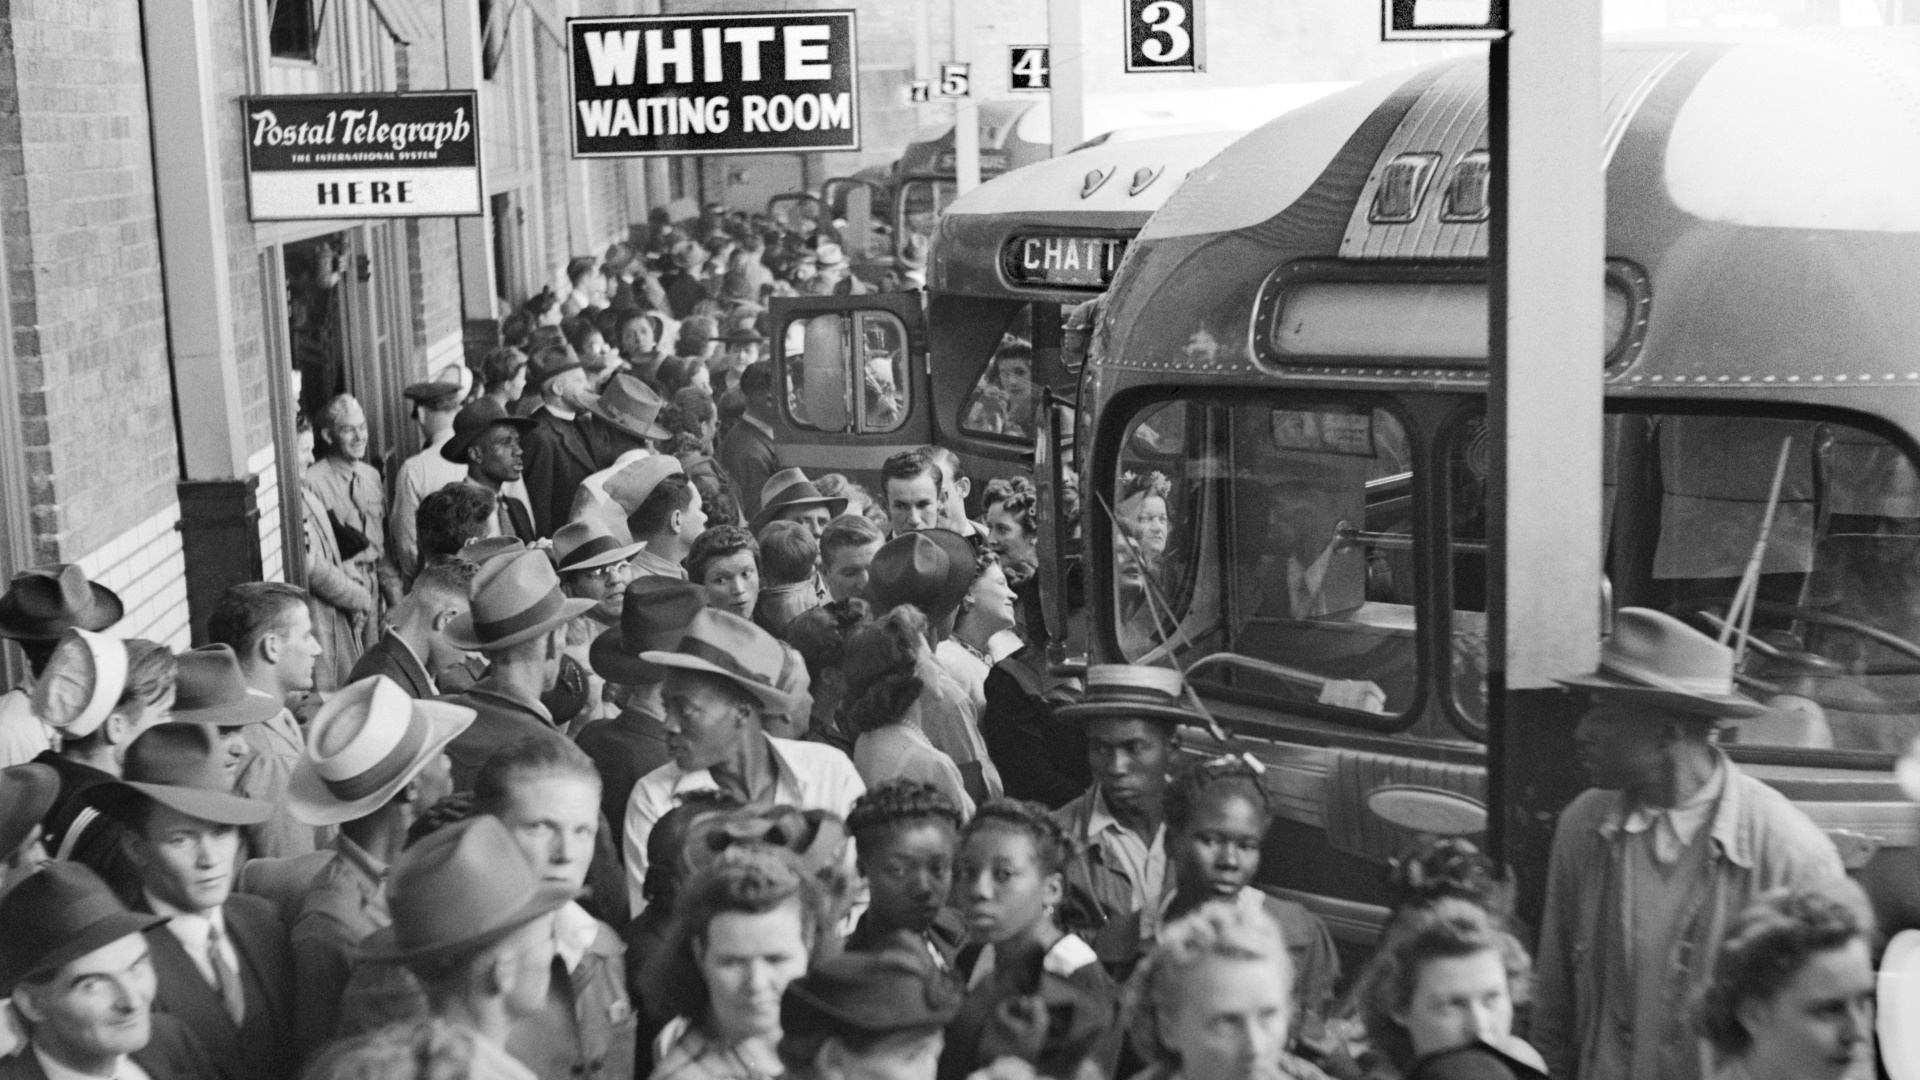 A segregated 
bus station in Memphis, 1943. Photo: Universal History Archive/Universal Images Group/Getty